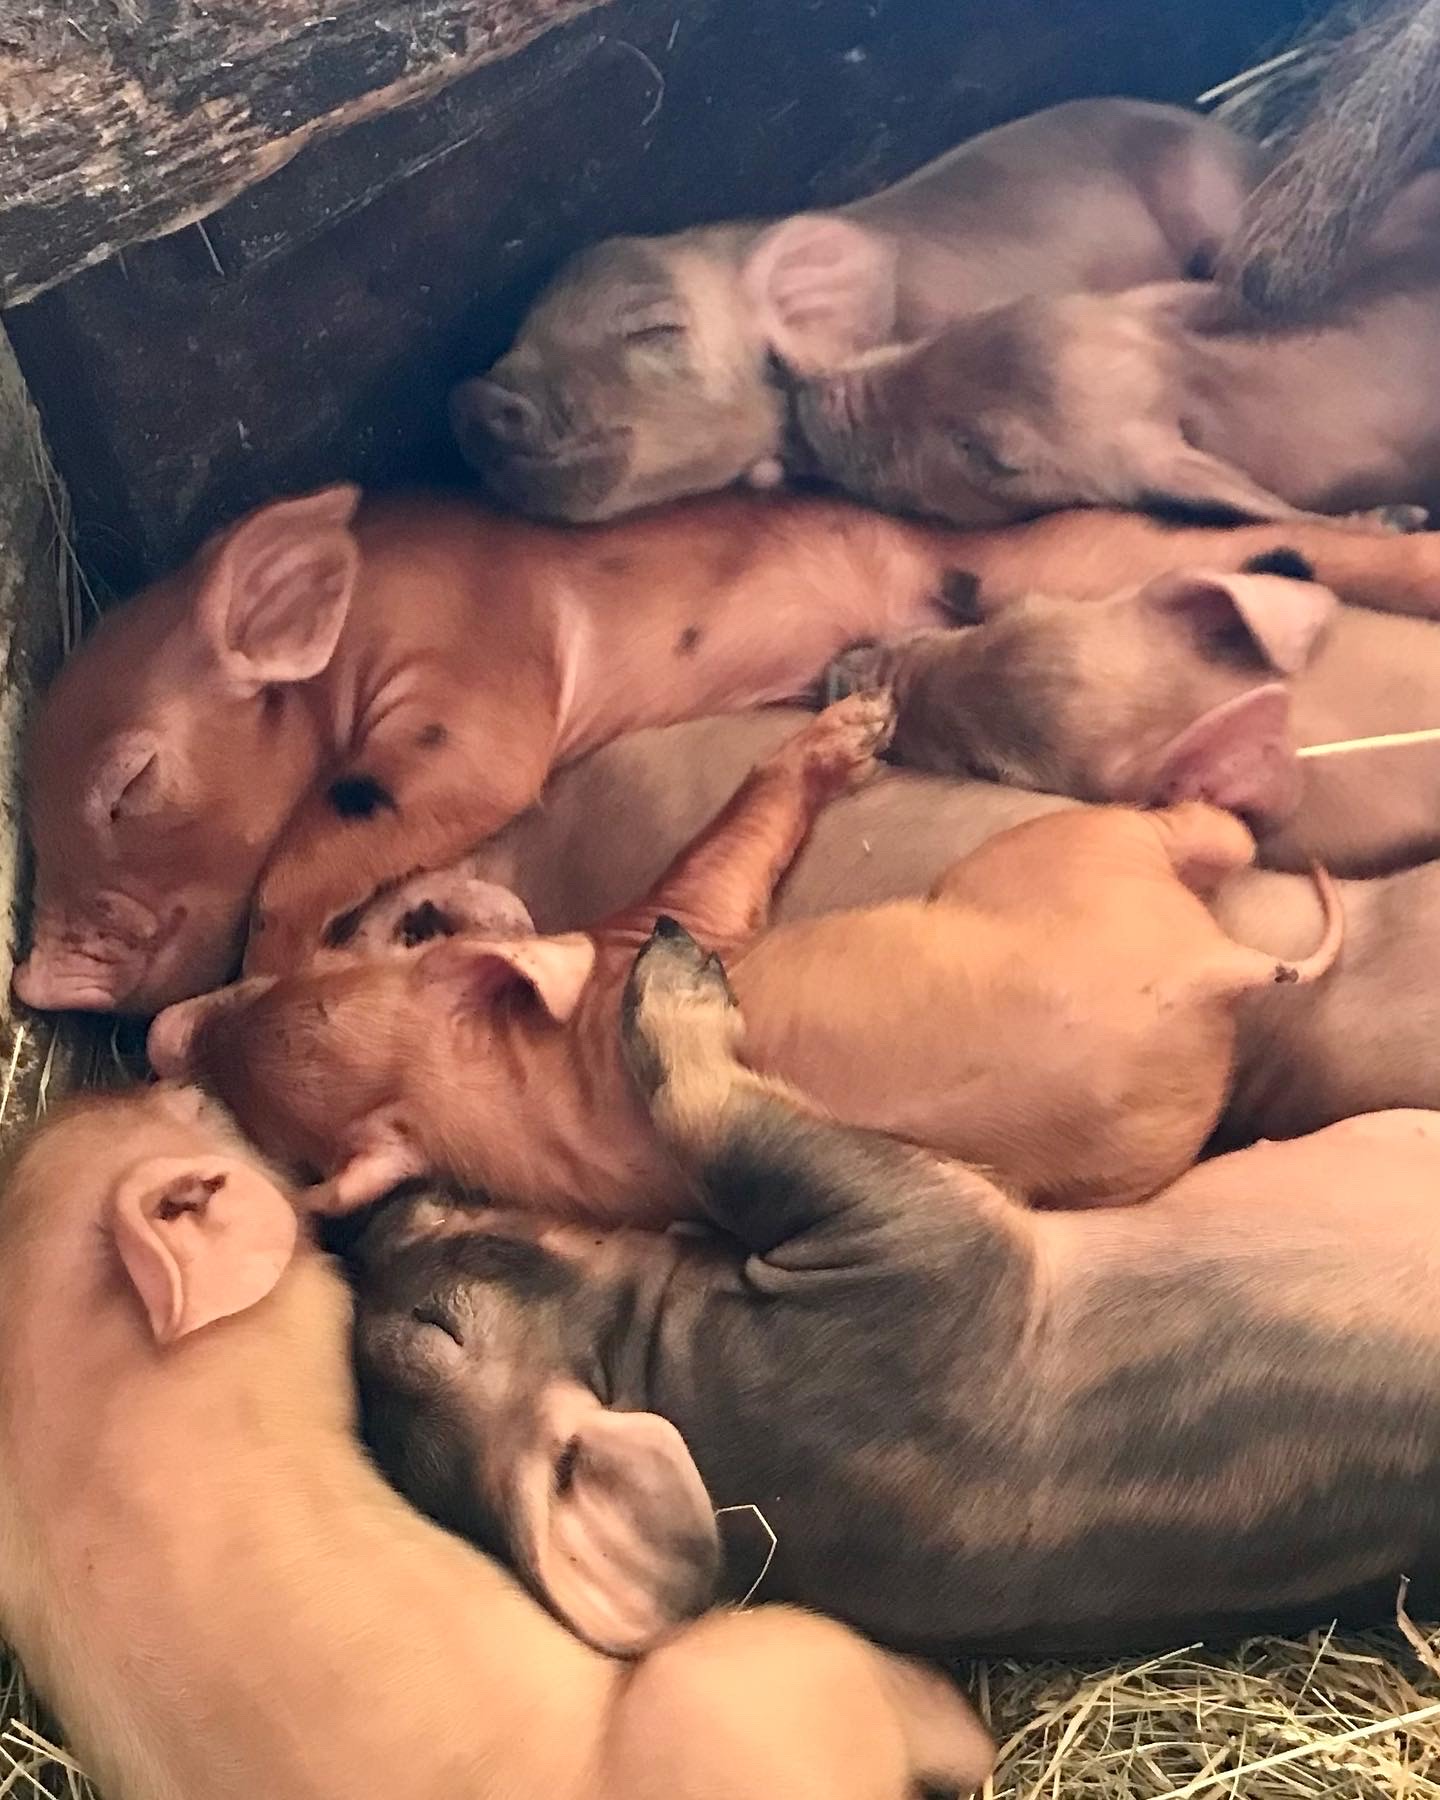 A group of small piglets sleep snuggled together in a cozy pile on some straw. Their bodies overlap as they rest peacefully, forming a tight cluster. The image captures the warmth and comfort of their shared space, reminiscent of enjoying coffee in Duluth's inviting cafes.